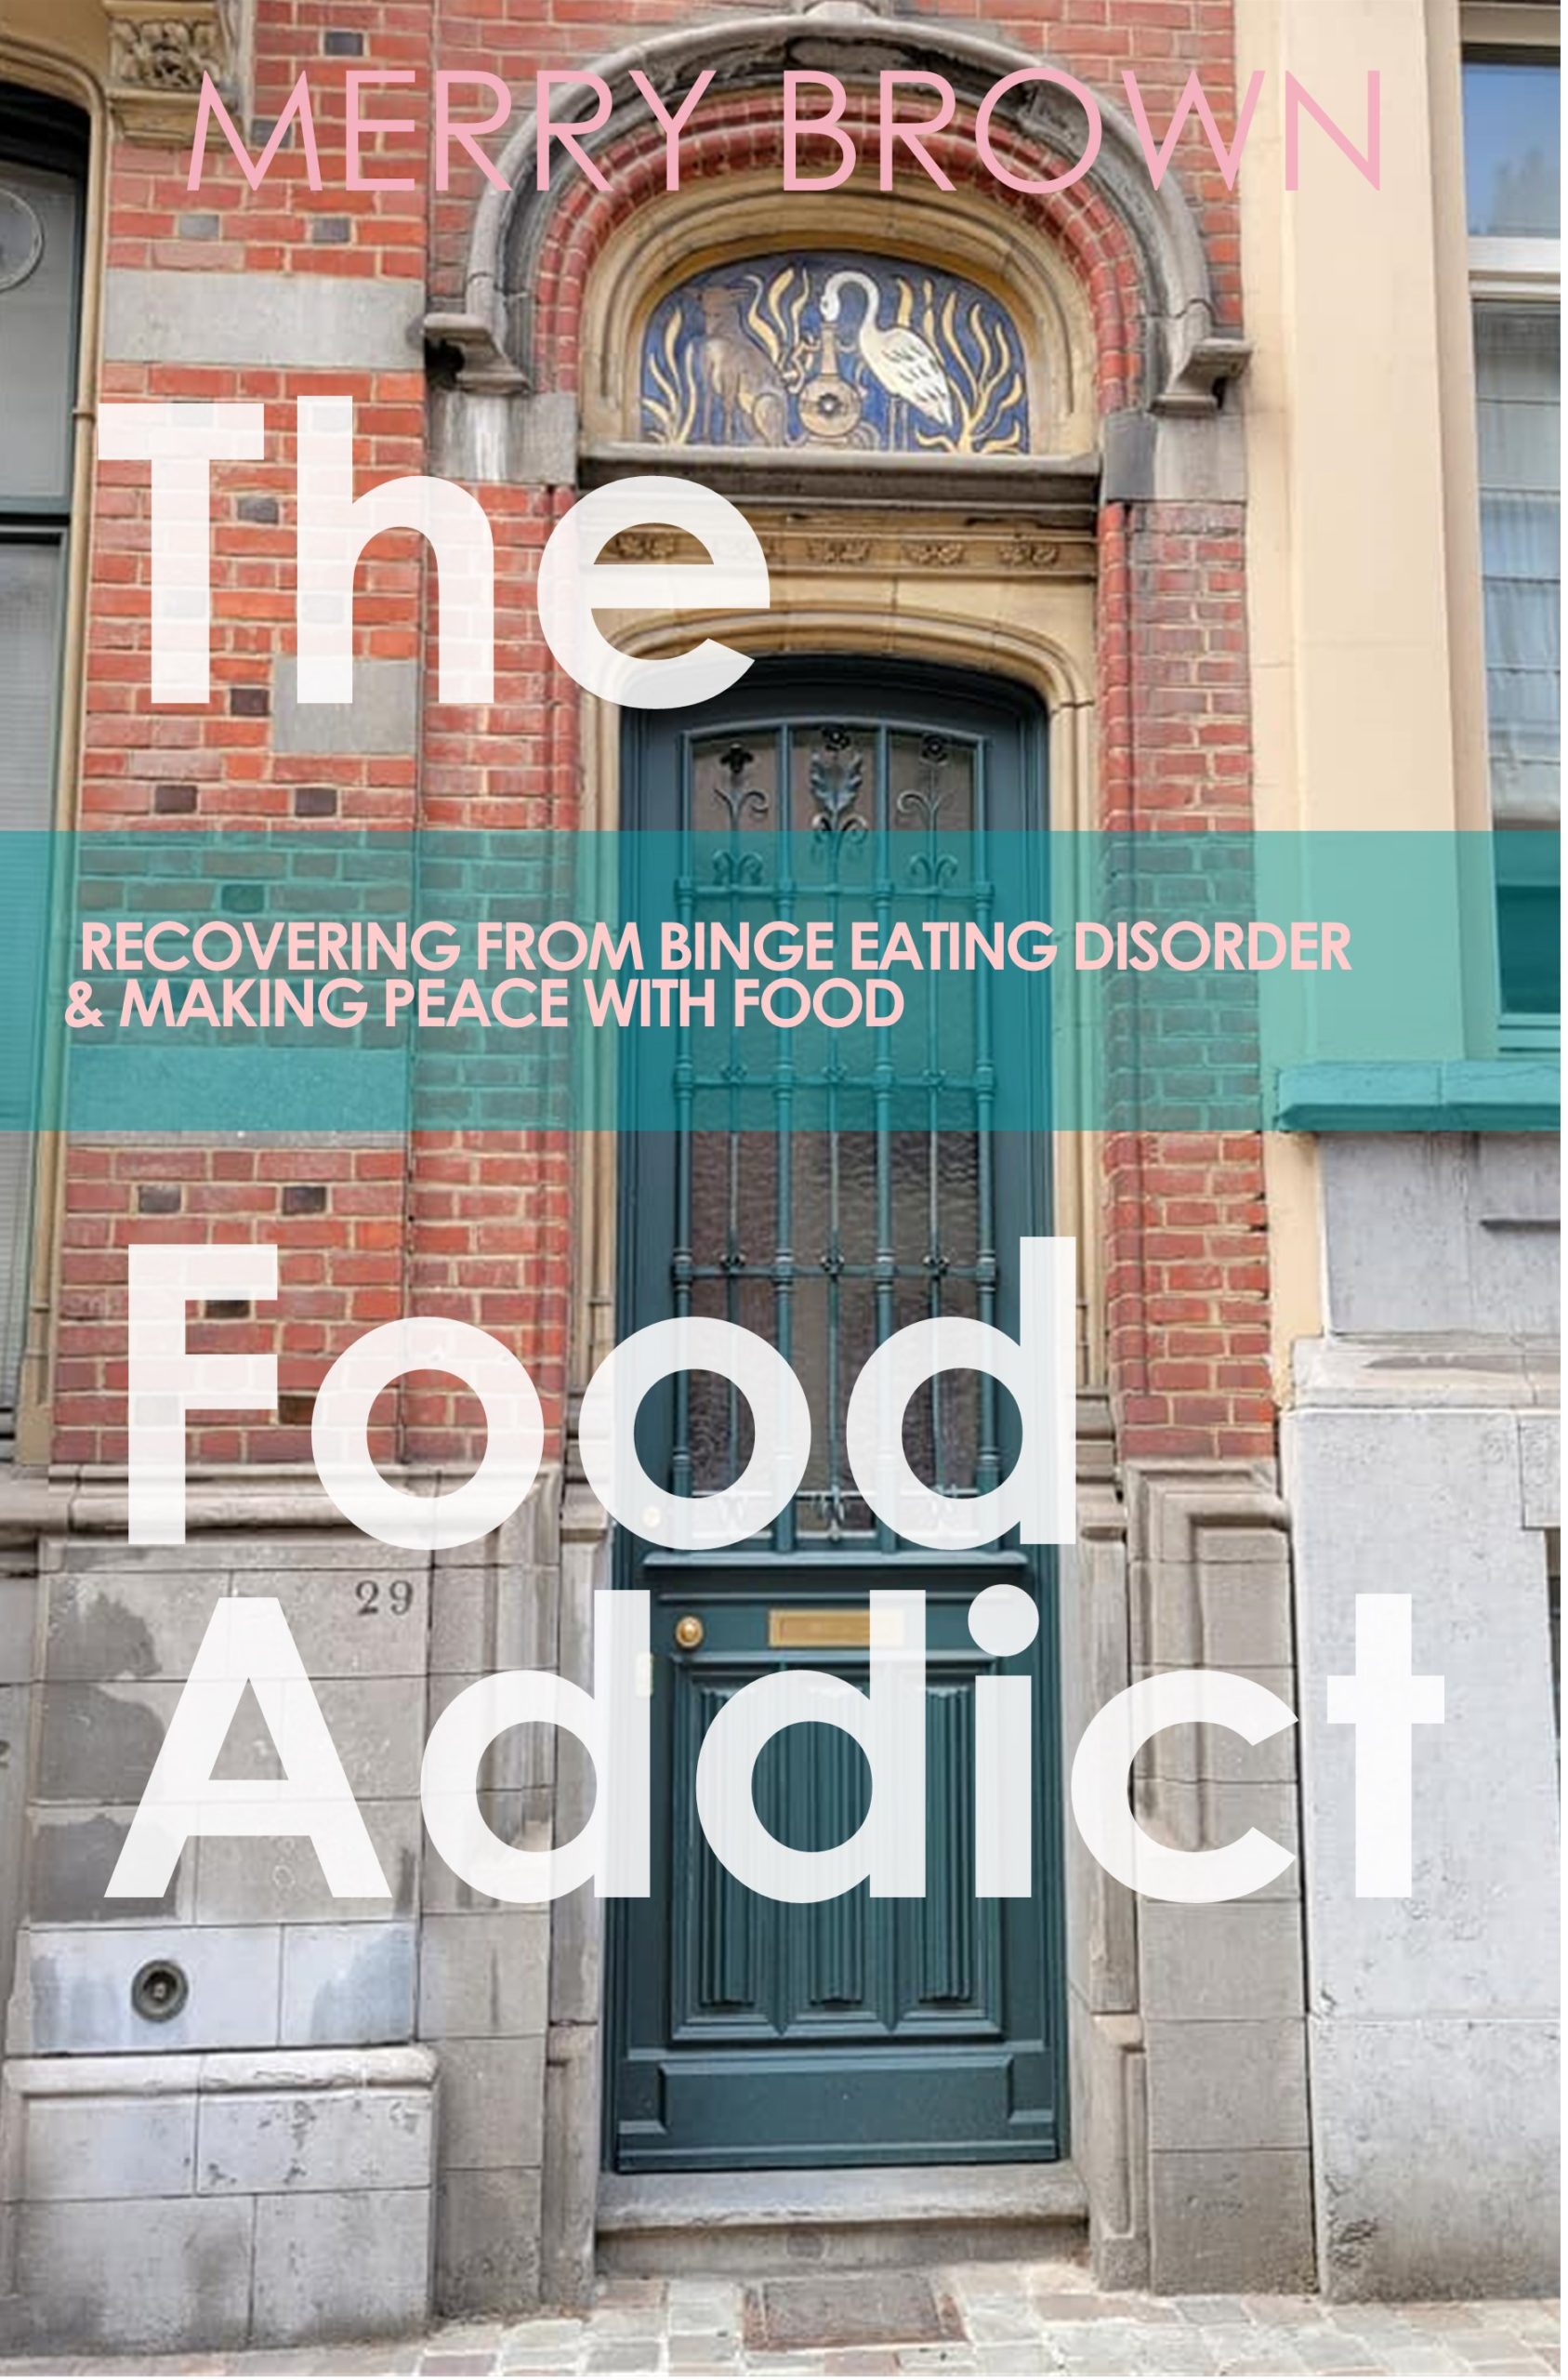 Cover of the book The Food Addict: Recovering from Binge Eating Disorder and Making Peace with Food